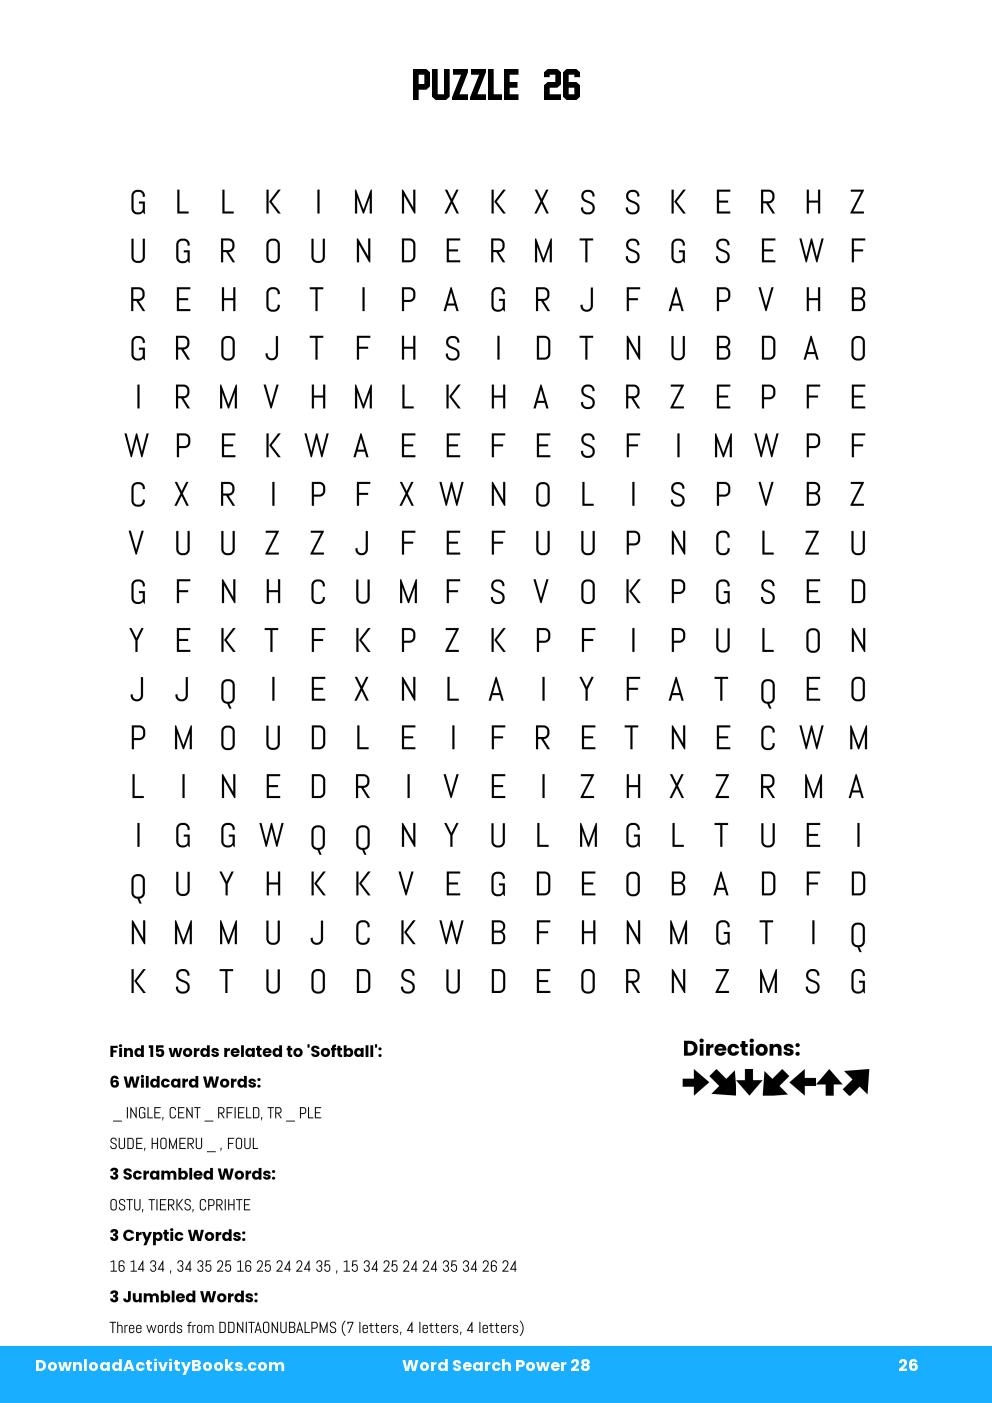 Word Search Power in Word Search Power 28